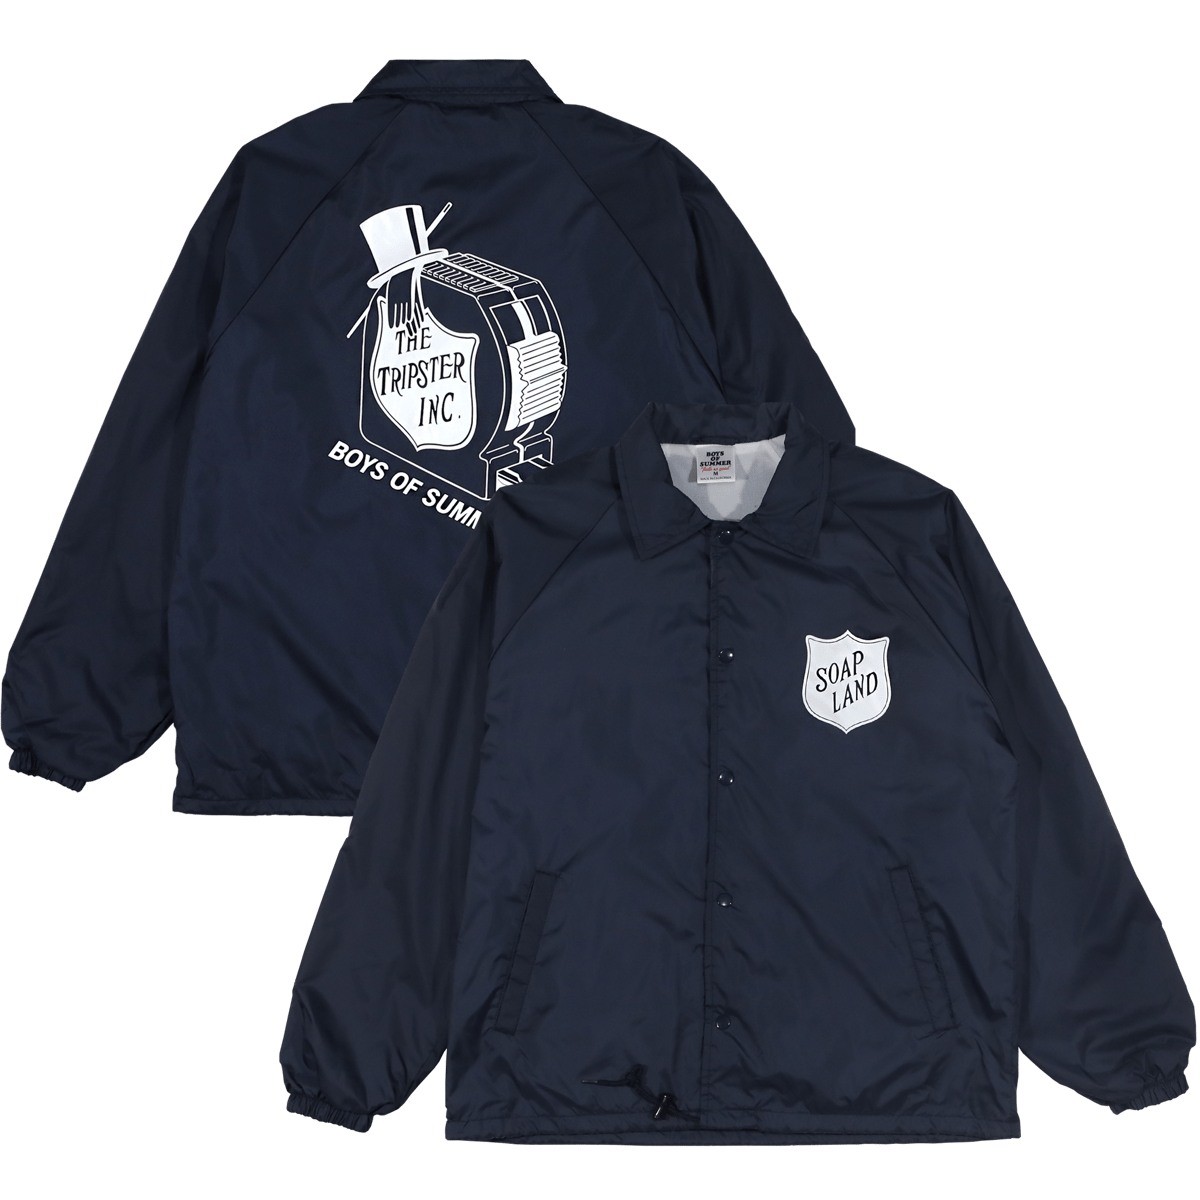 Boys of Tripsters Soap Land Coach Jacket